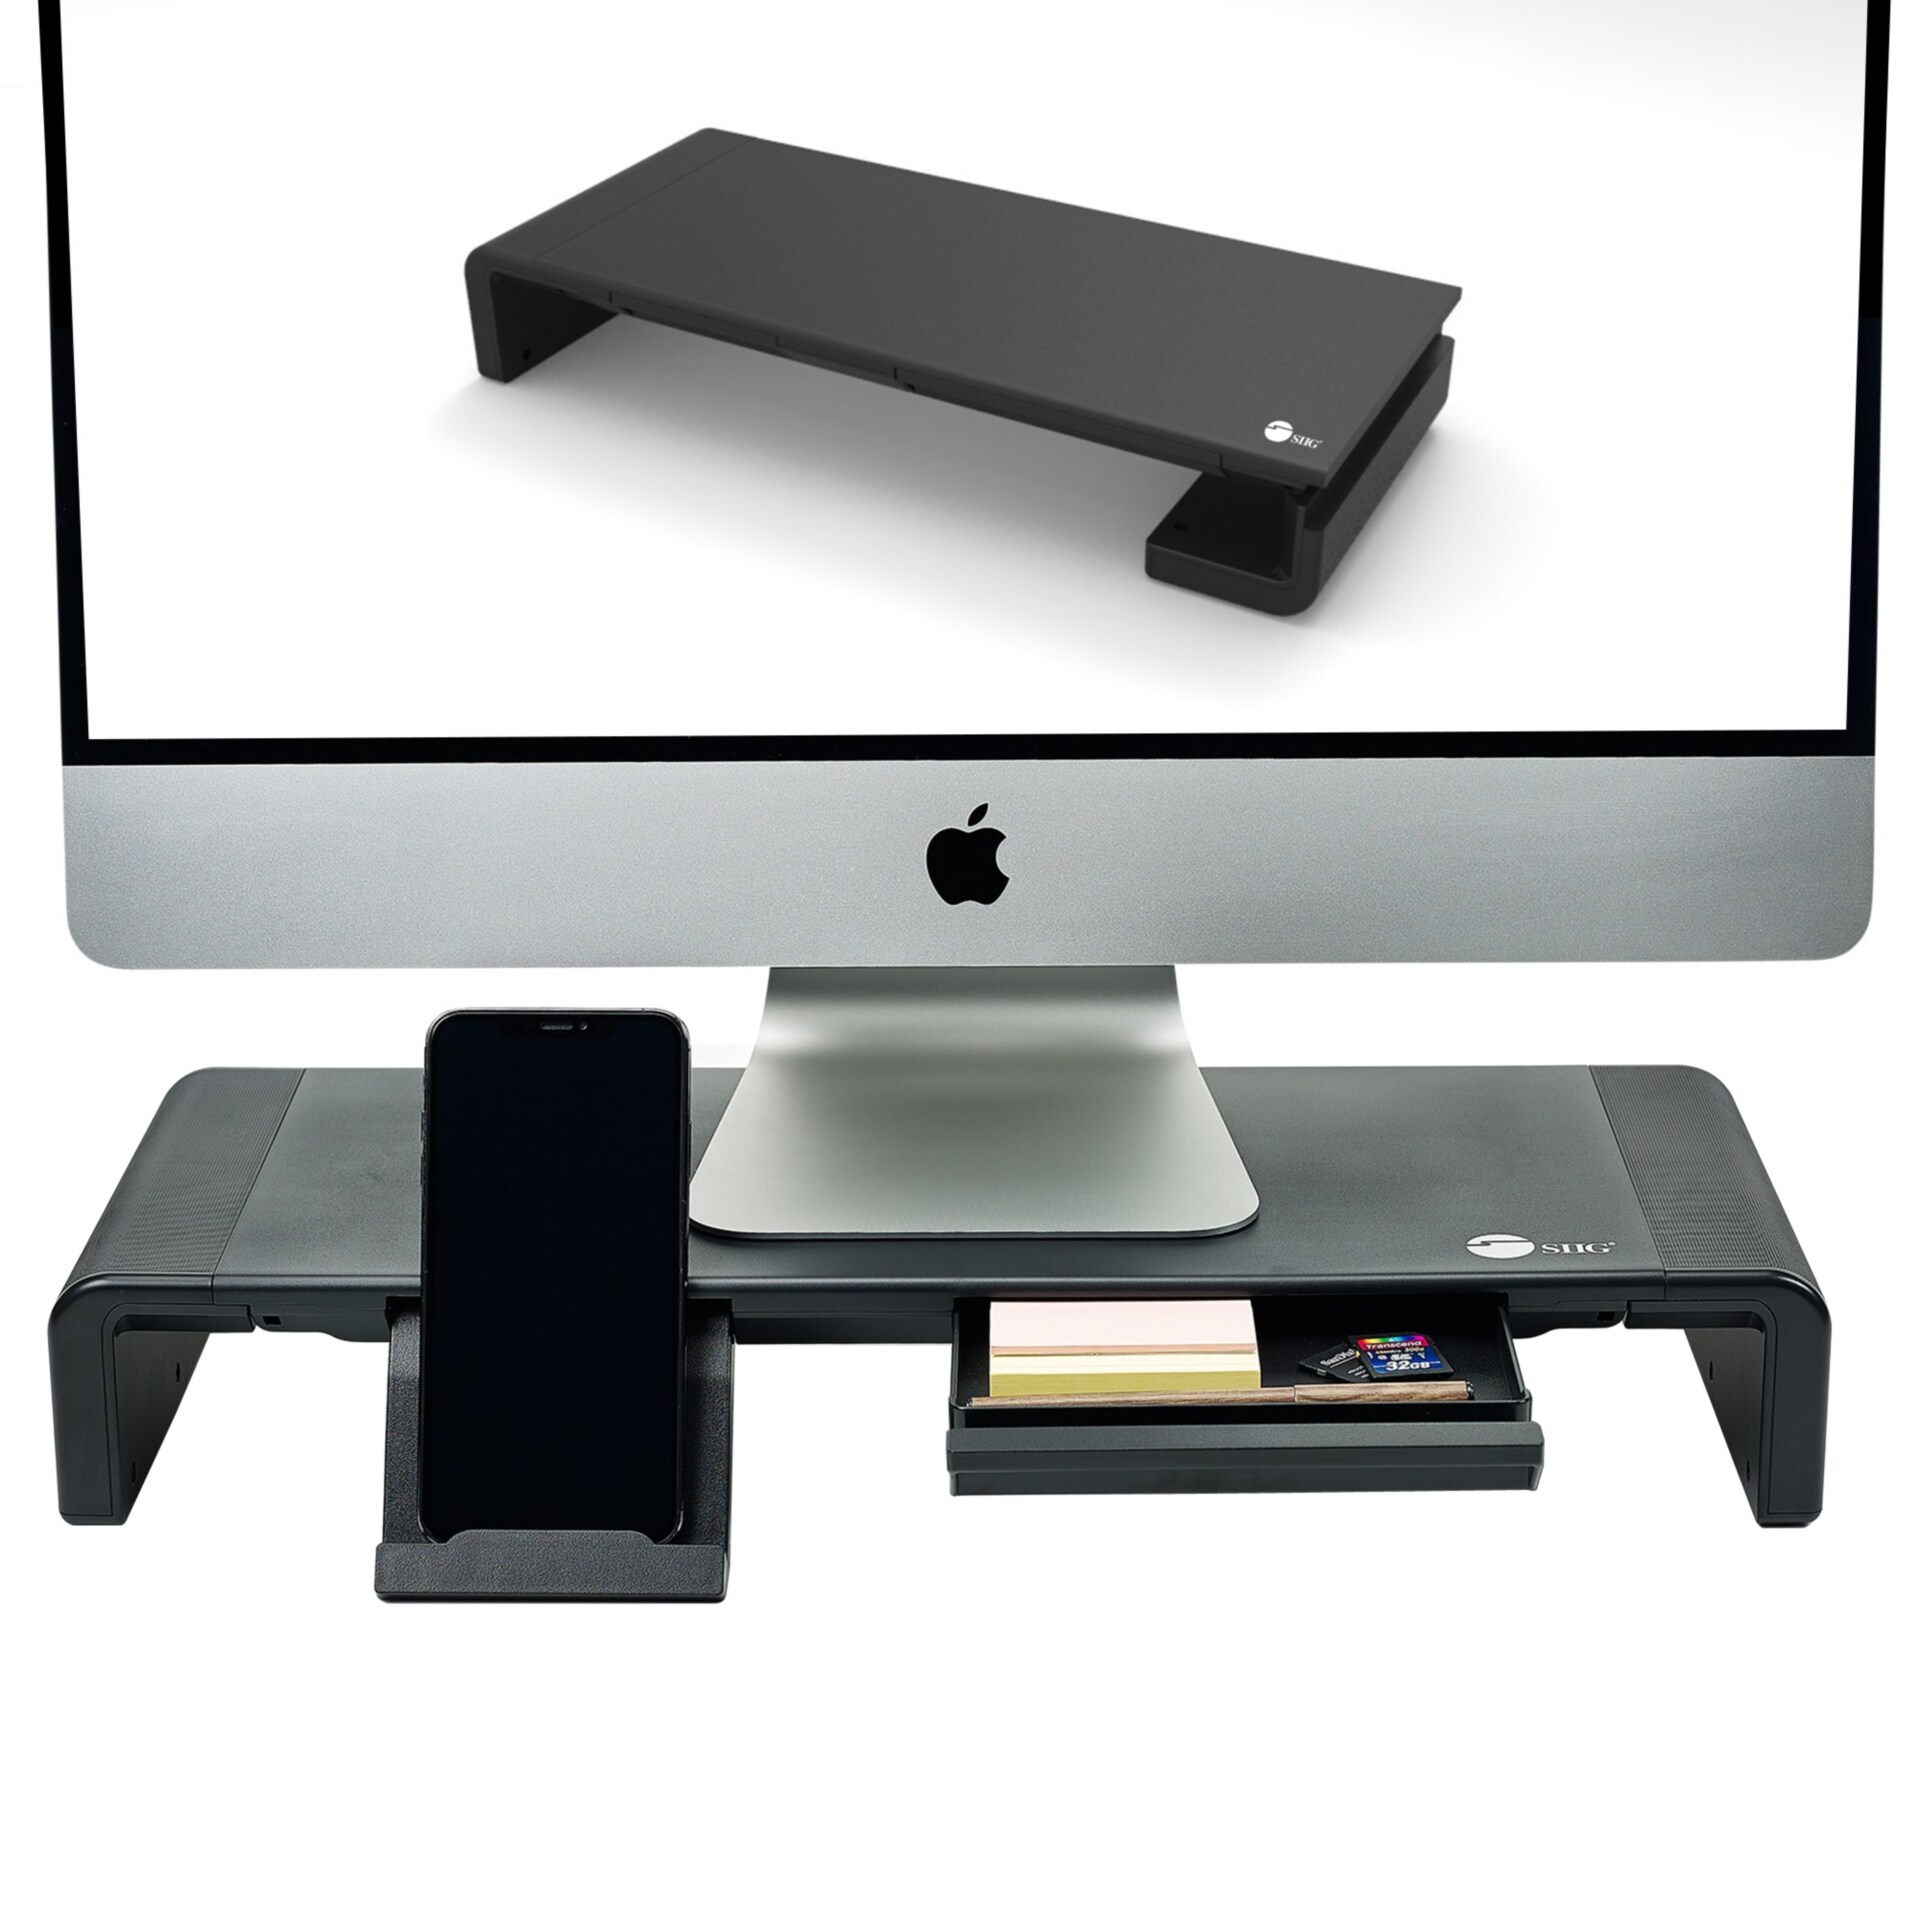 SIIG Stylish Foldable Monitor Stand - stand - foldable - for monitor - blac